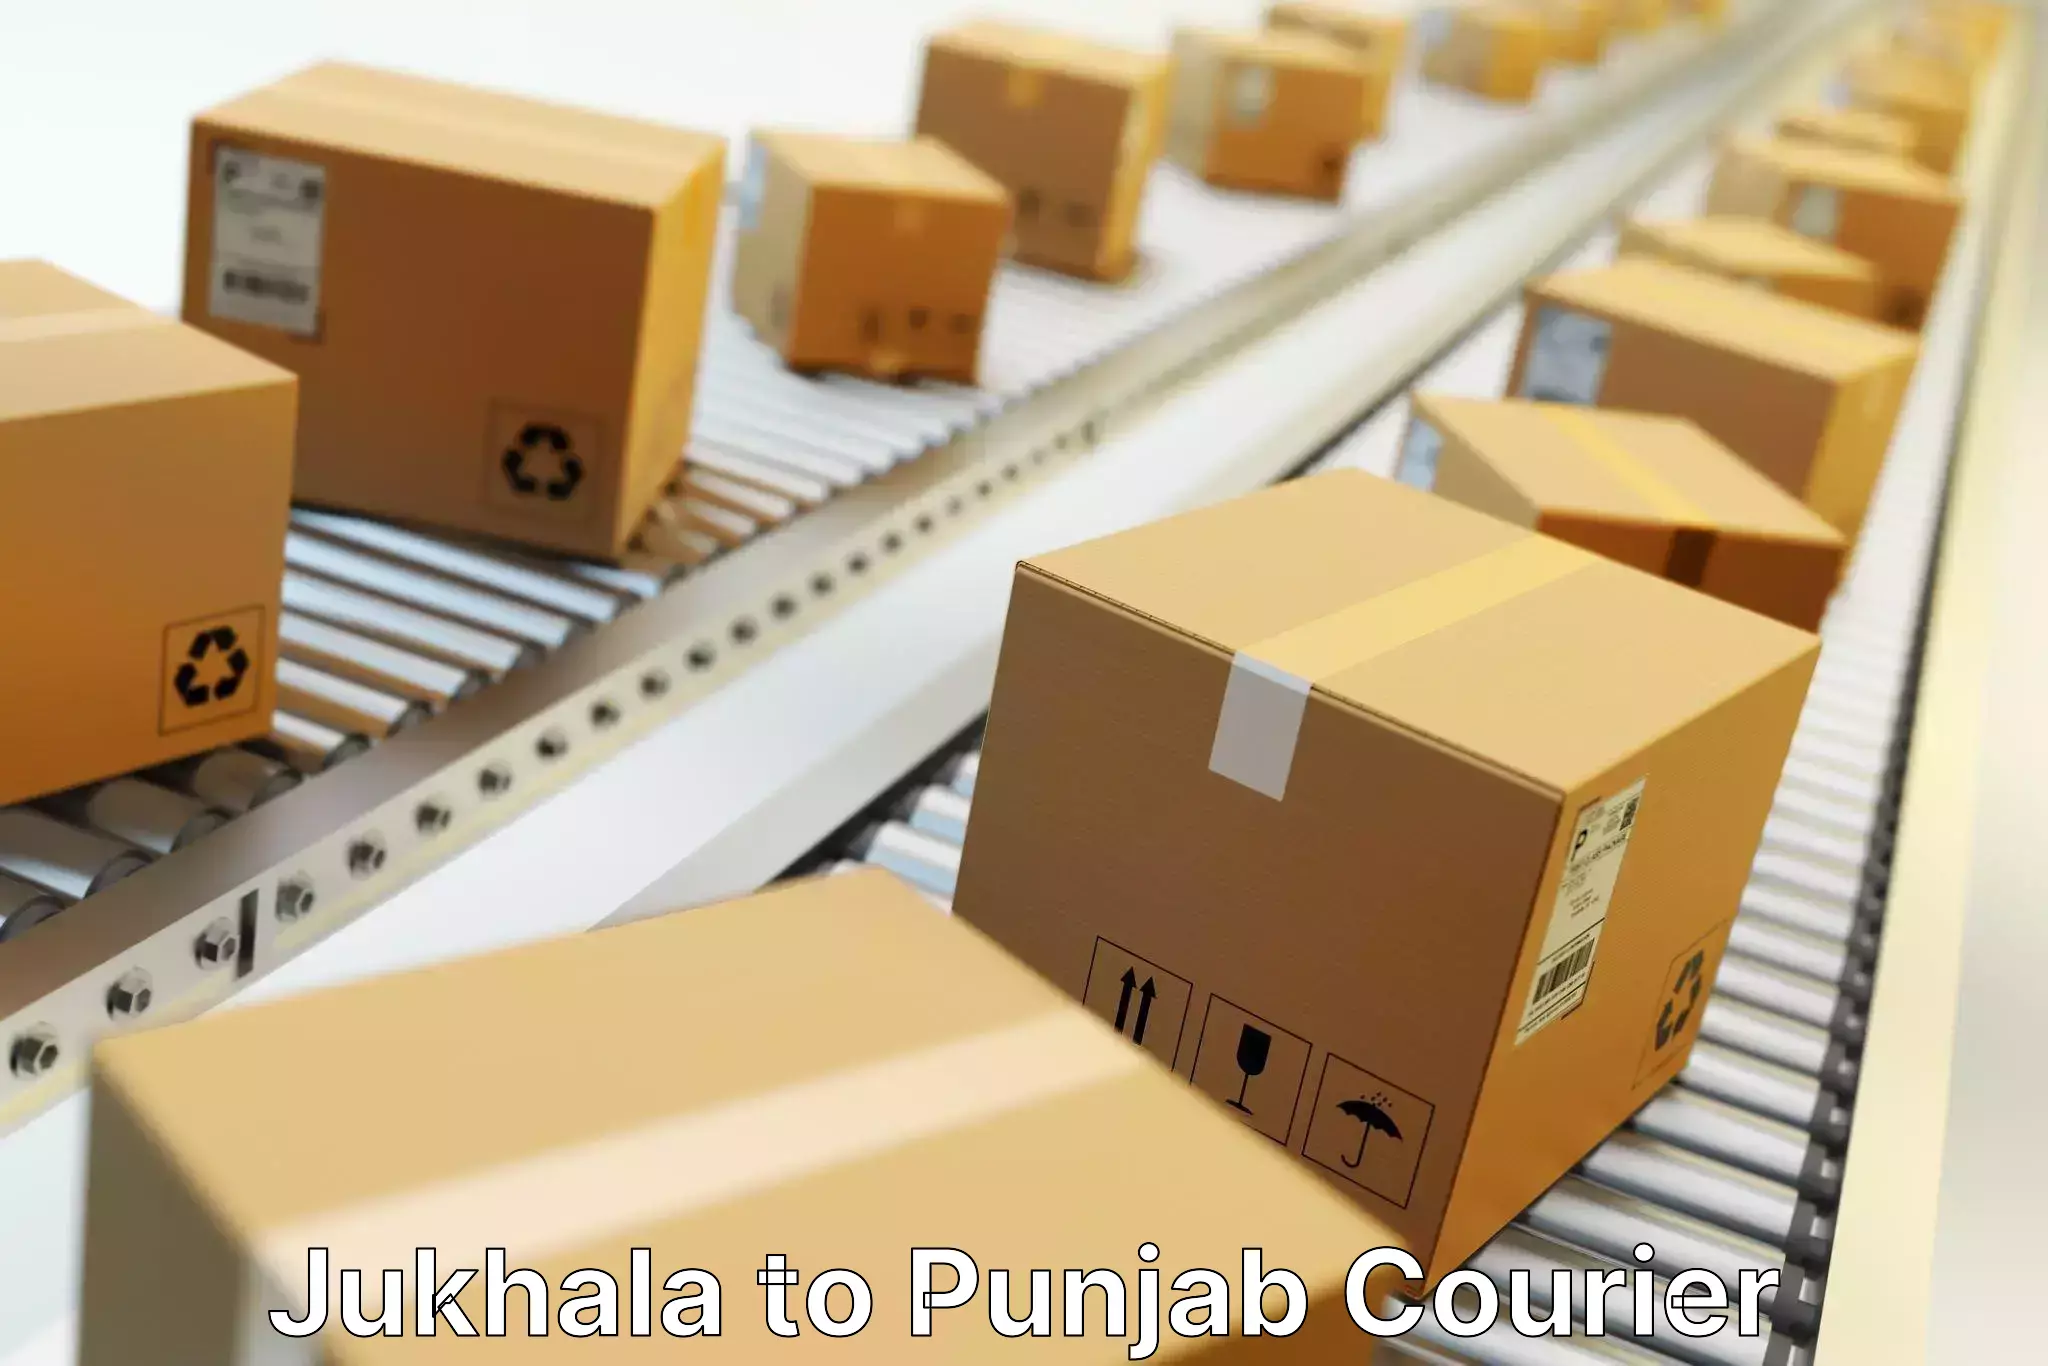 Personal parcel delivery in Jukhala to Dinanagar